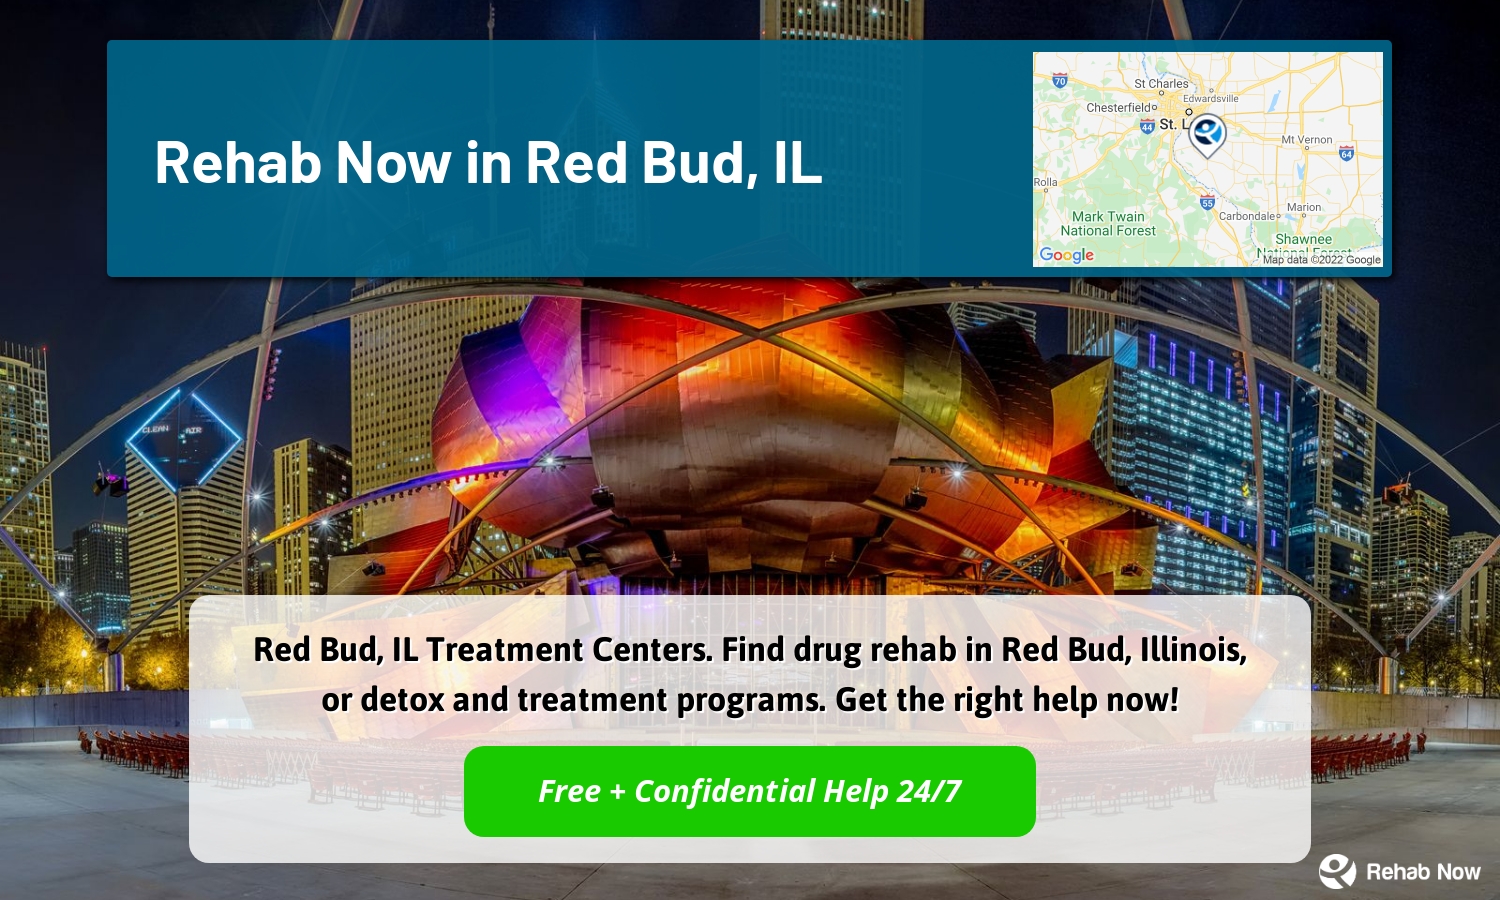 Red Bud, IL Treatment Centers. Find drug rehab in Red Bud, Illinois, or detox and treatment programs. Get the right help now!